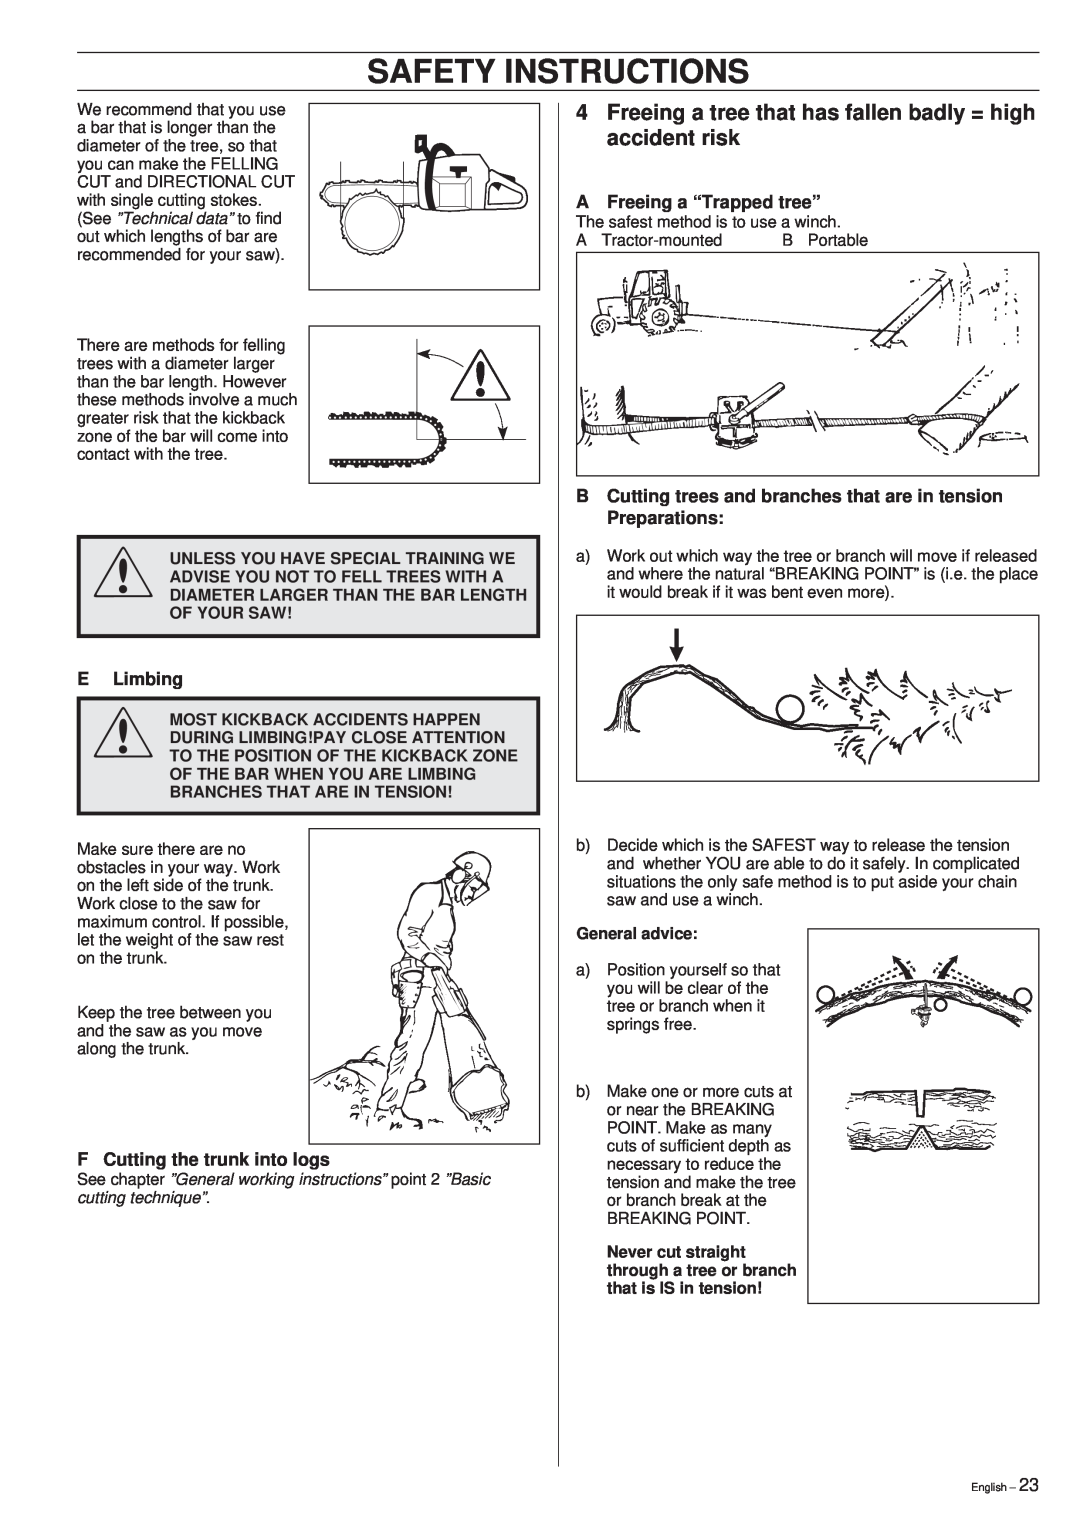 Husqvarna 40 manual Safety Instructions, ELimbing, F Cutting the trunk into logs, AFreeing a “Trapped tree” 